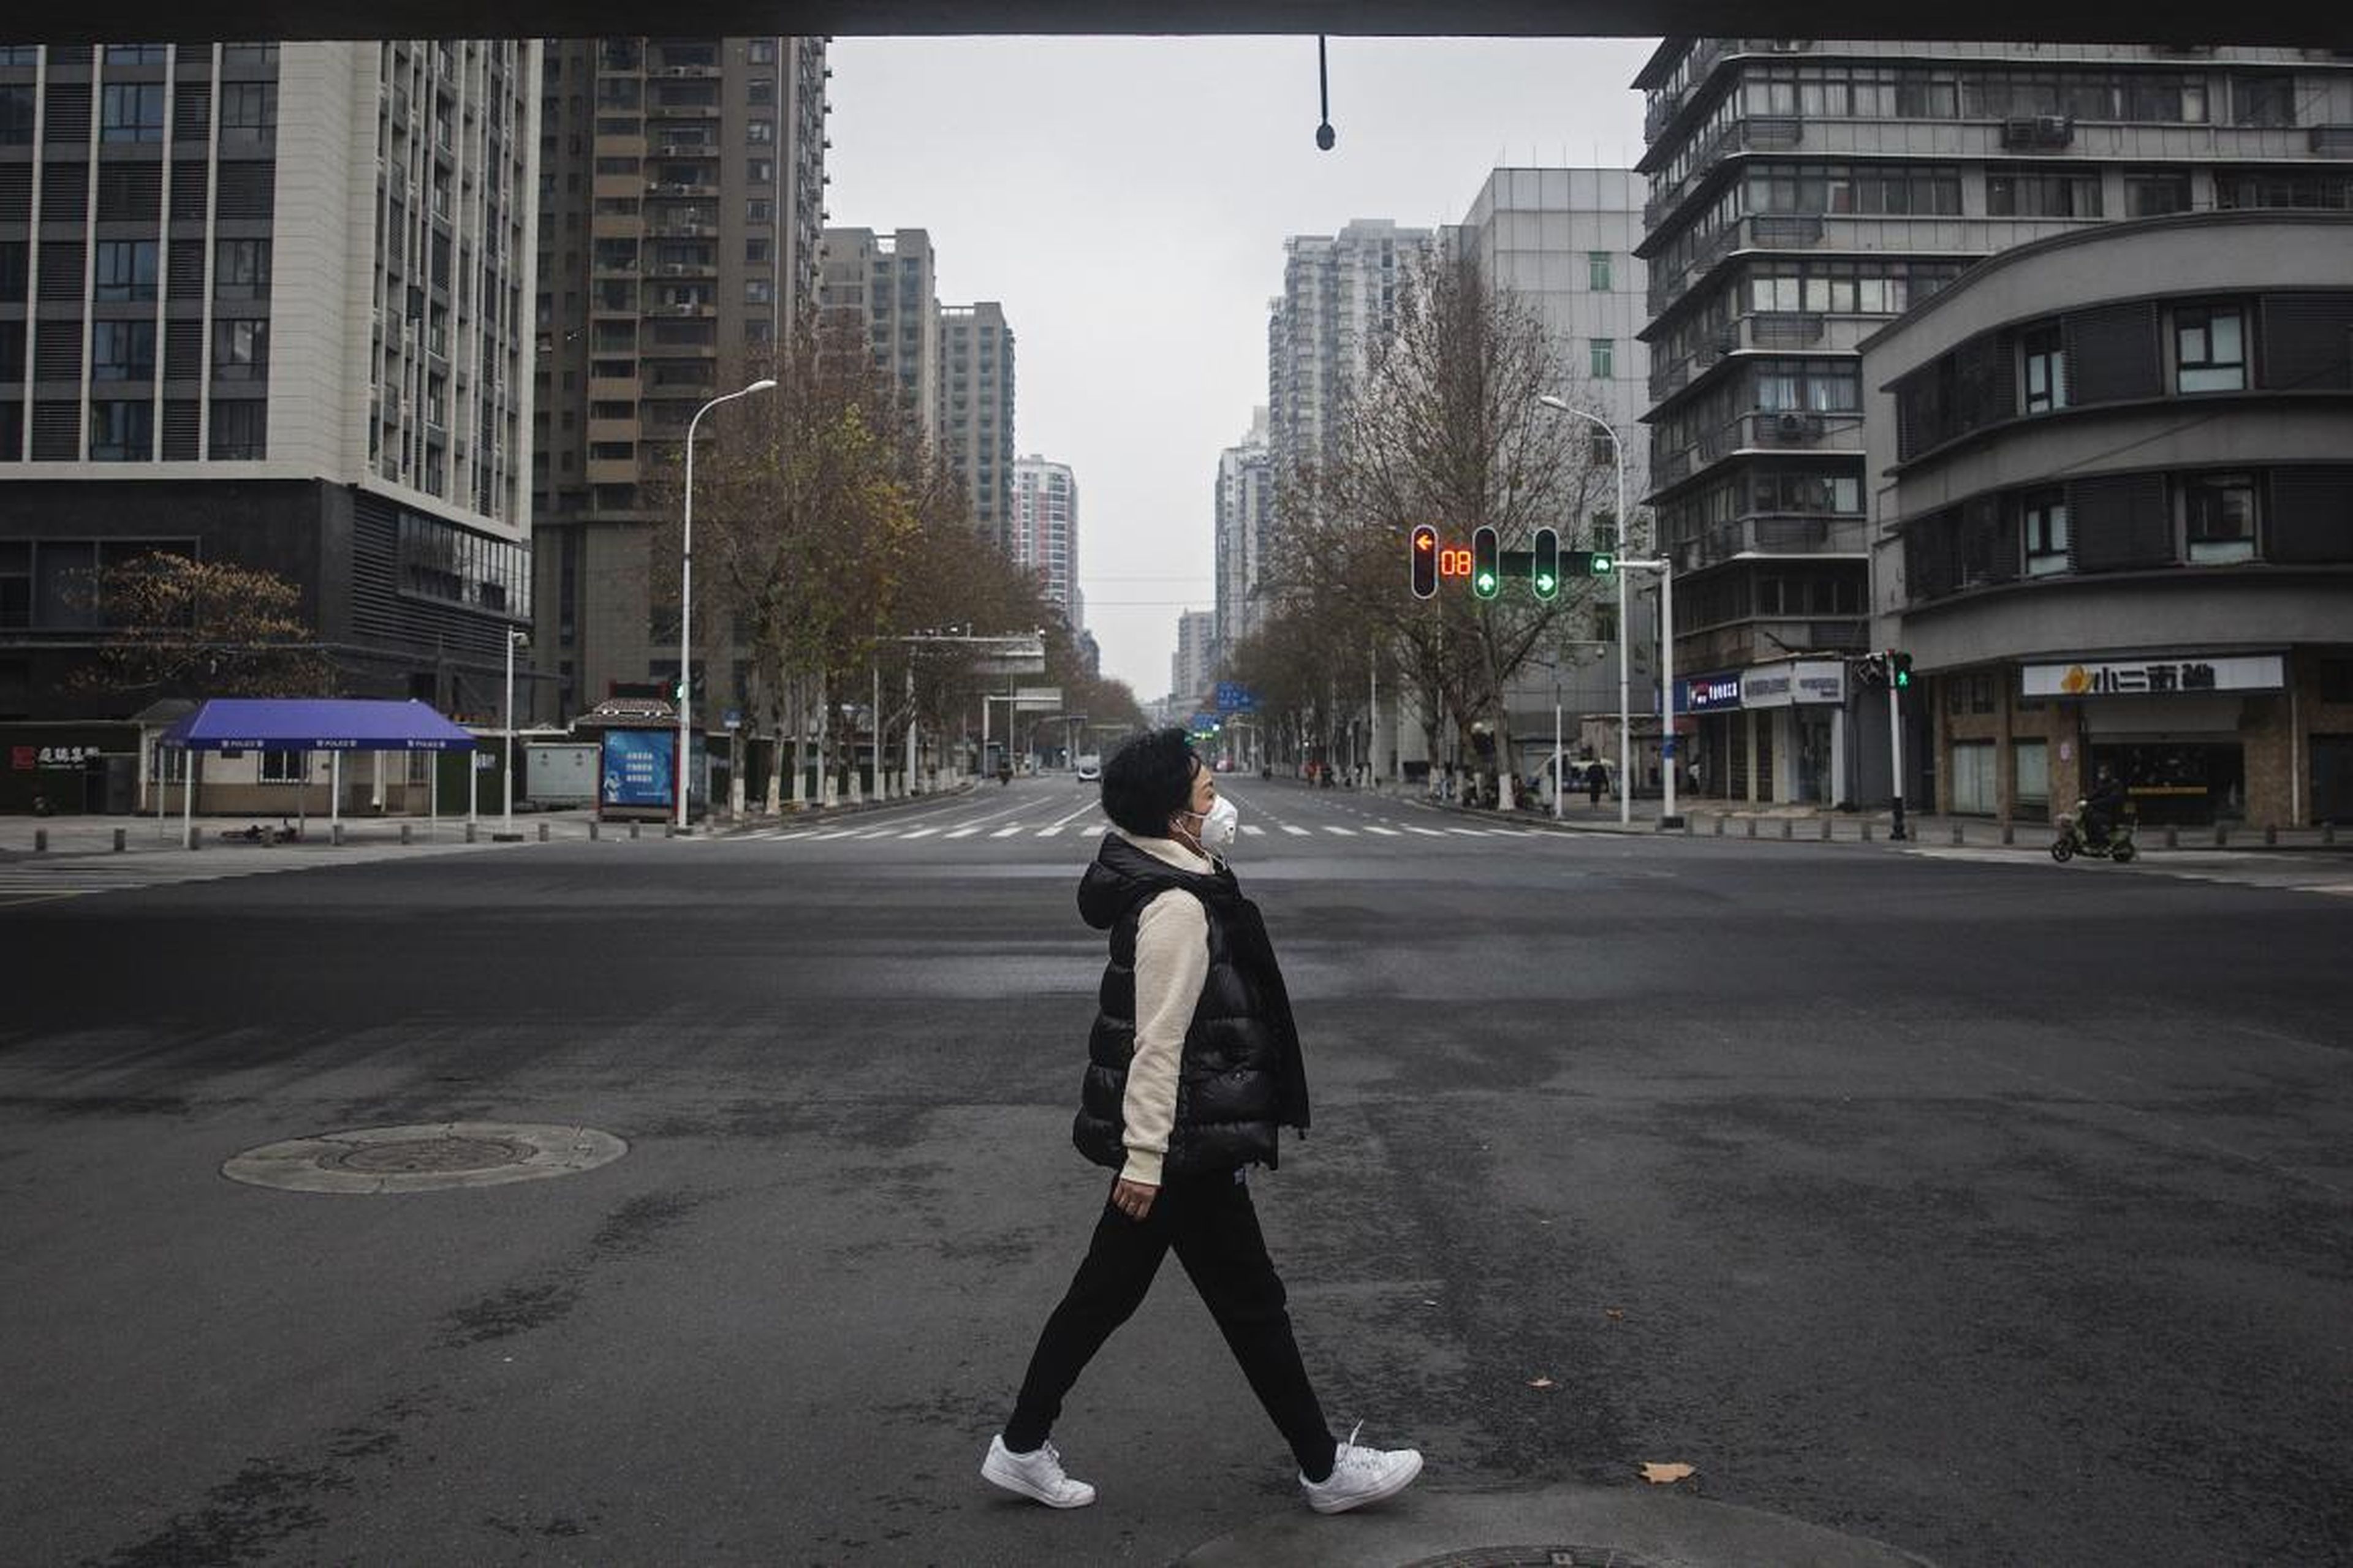 A woman walks on an empty road on January 27, 2020 in Wuhan, China. As the death toll from the coronavirus reaches 80 in China with over 2700 confirmed cases, the city remains on lockdown for a fourth day.